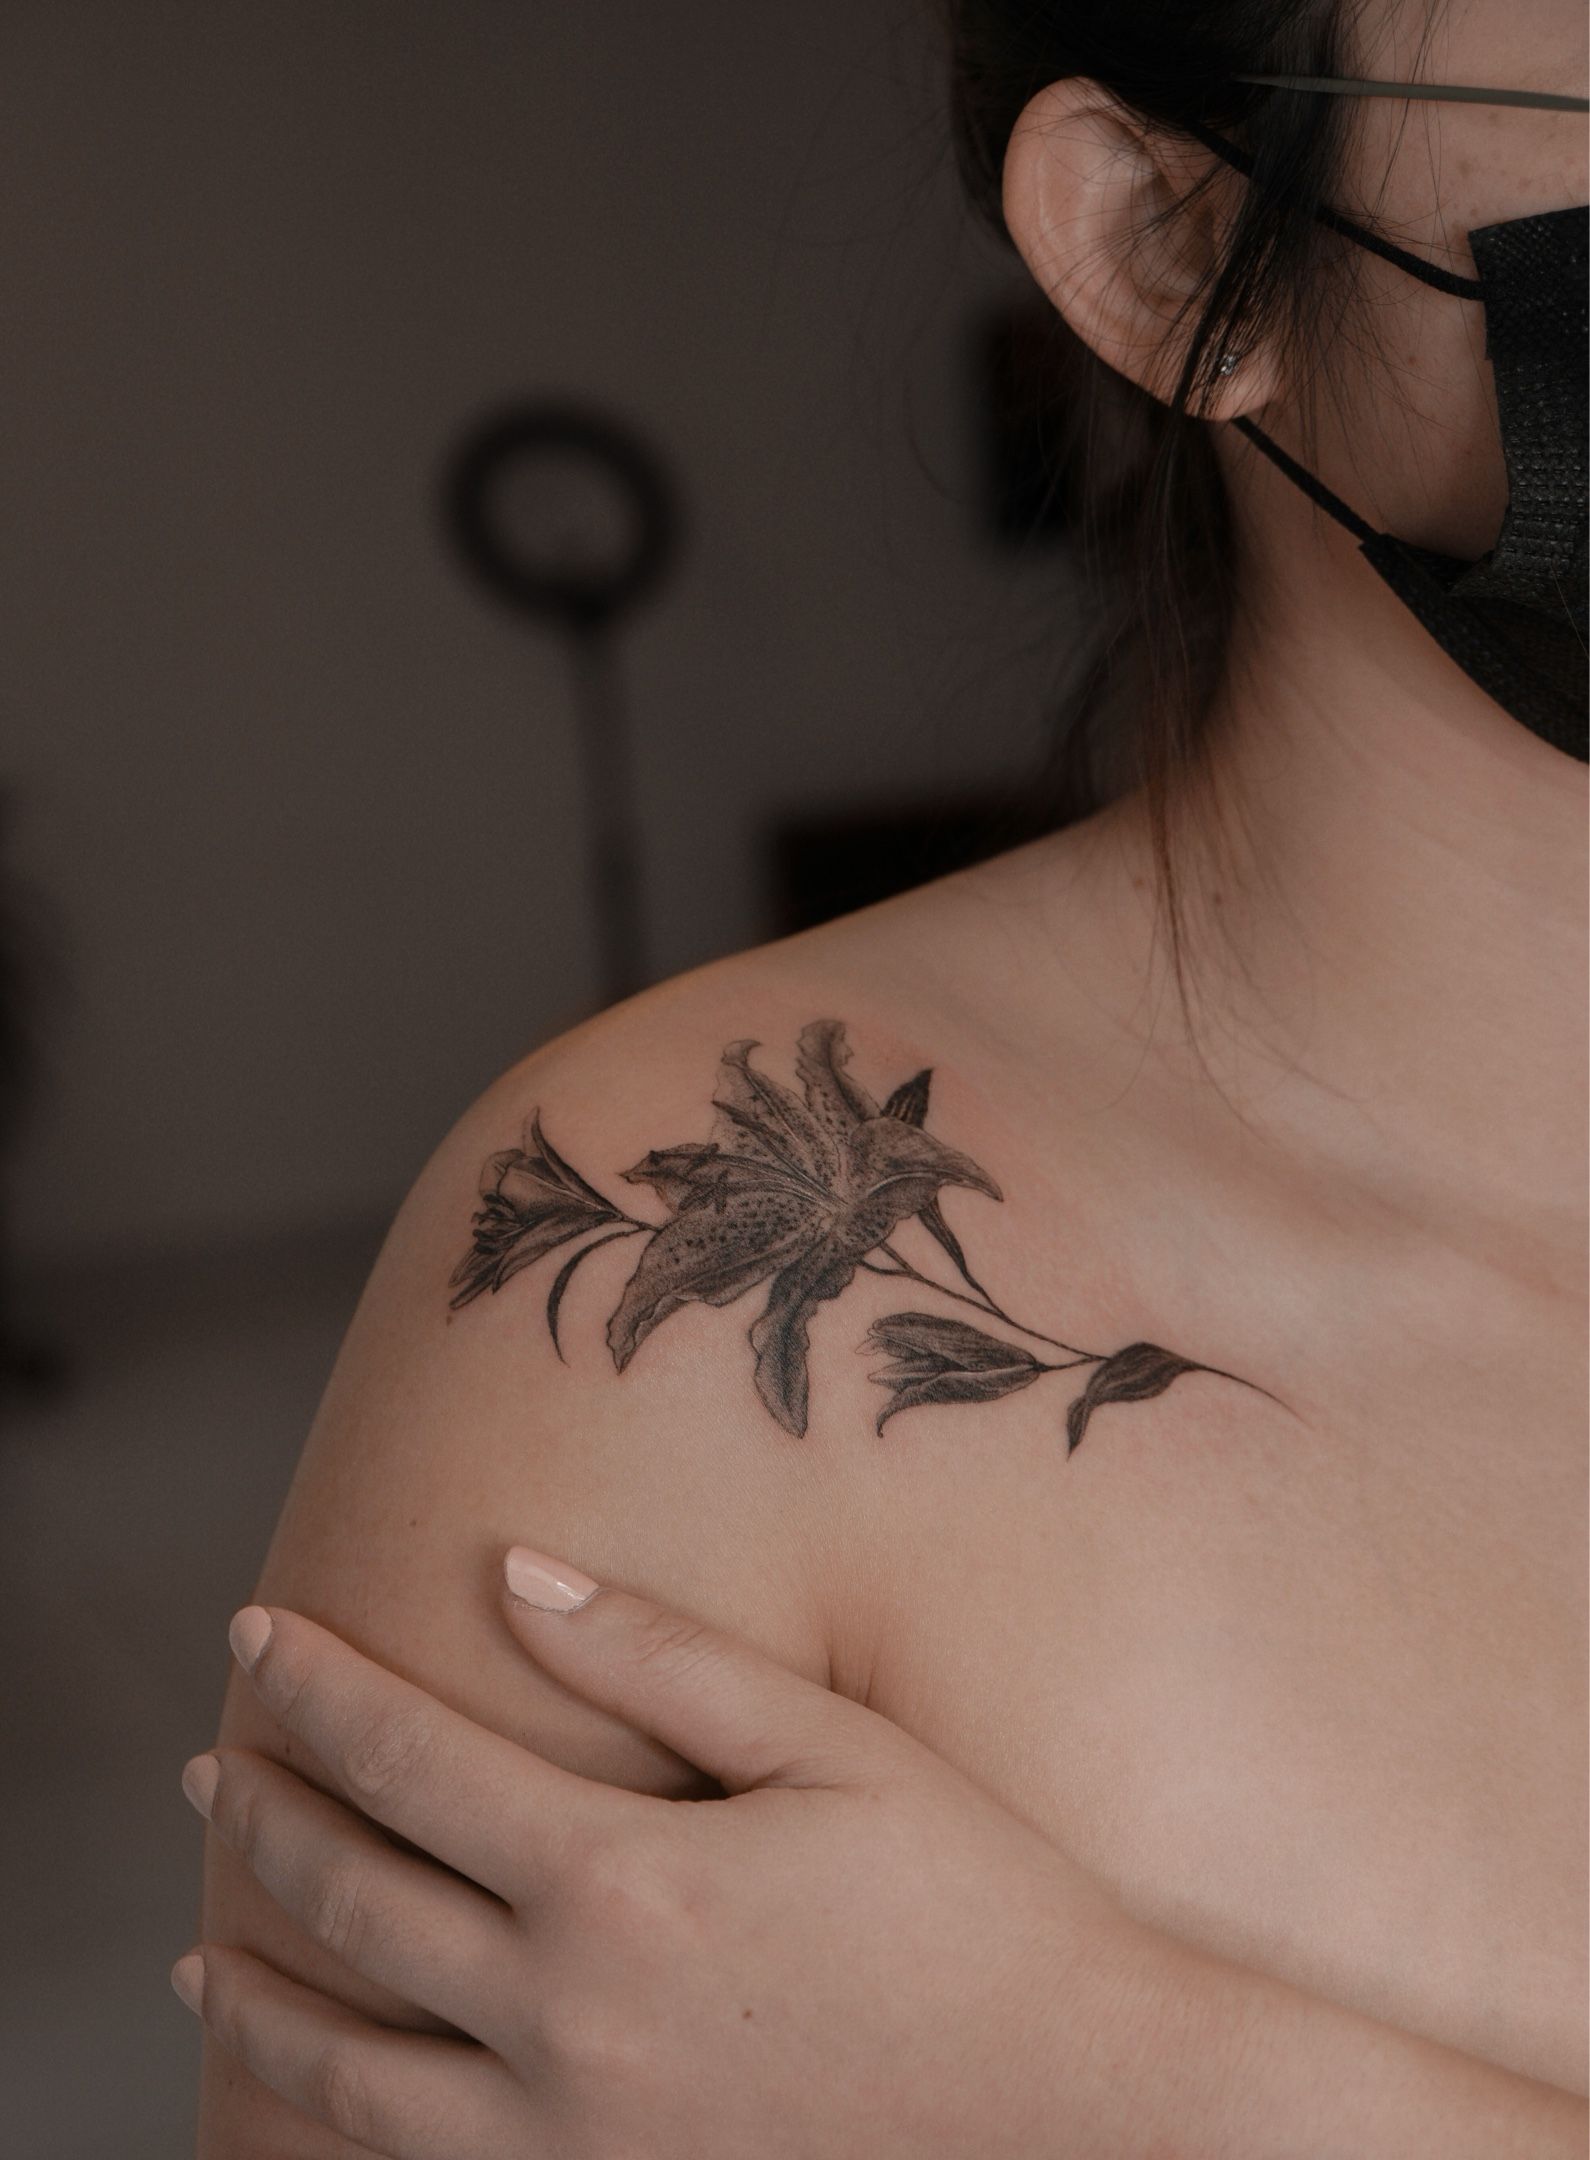 30+ Botanical Floral Lily Tattoo Designs On Arms Bring A Touch Of Elegance  | Tatuaje de lirio, Diseños de tatuaje de flores, Diseño de tatuaje de lirio